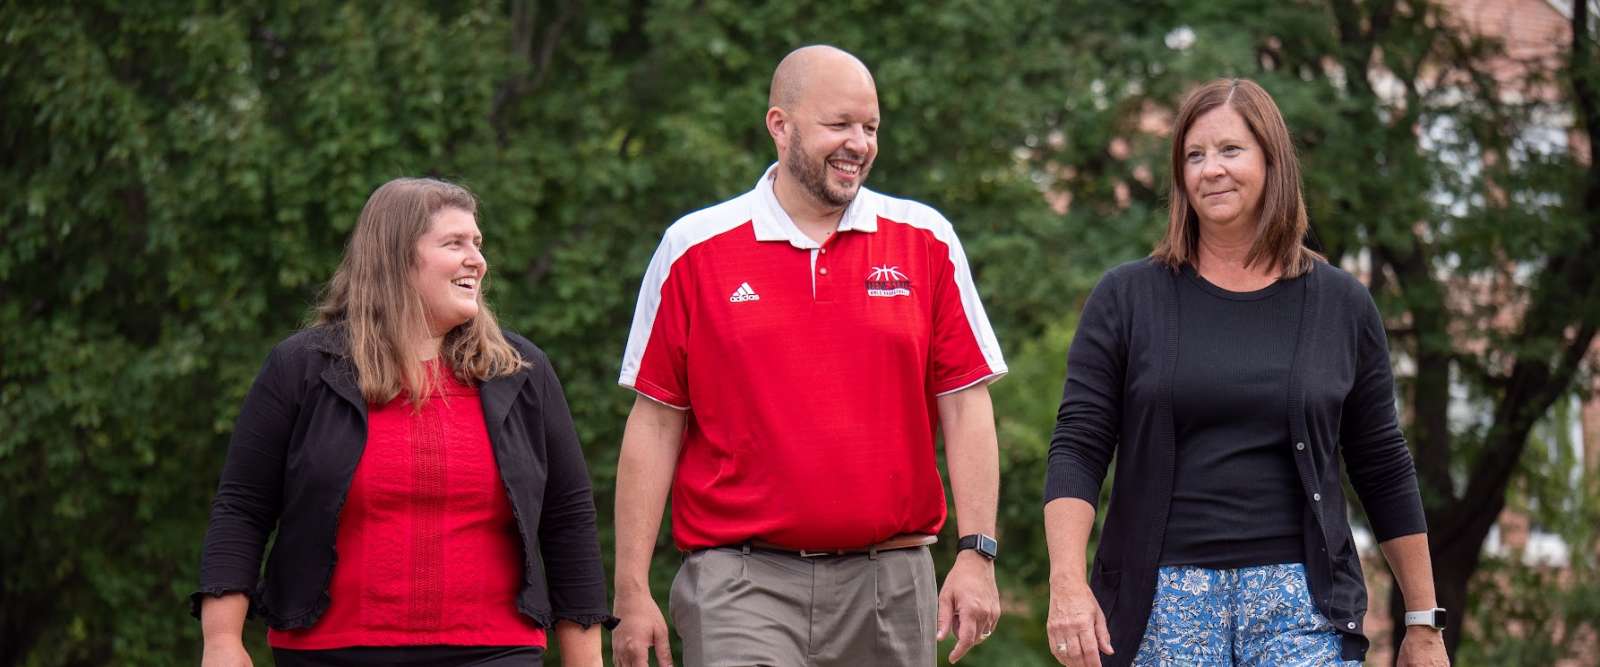 Three Admissions Counselors walk through campus